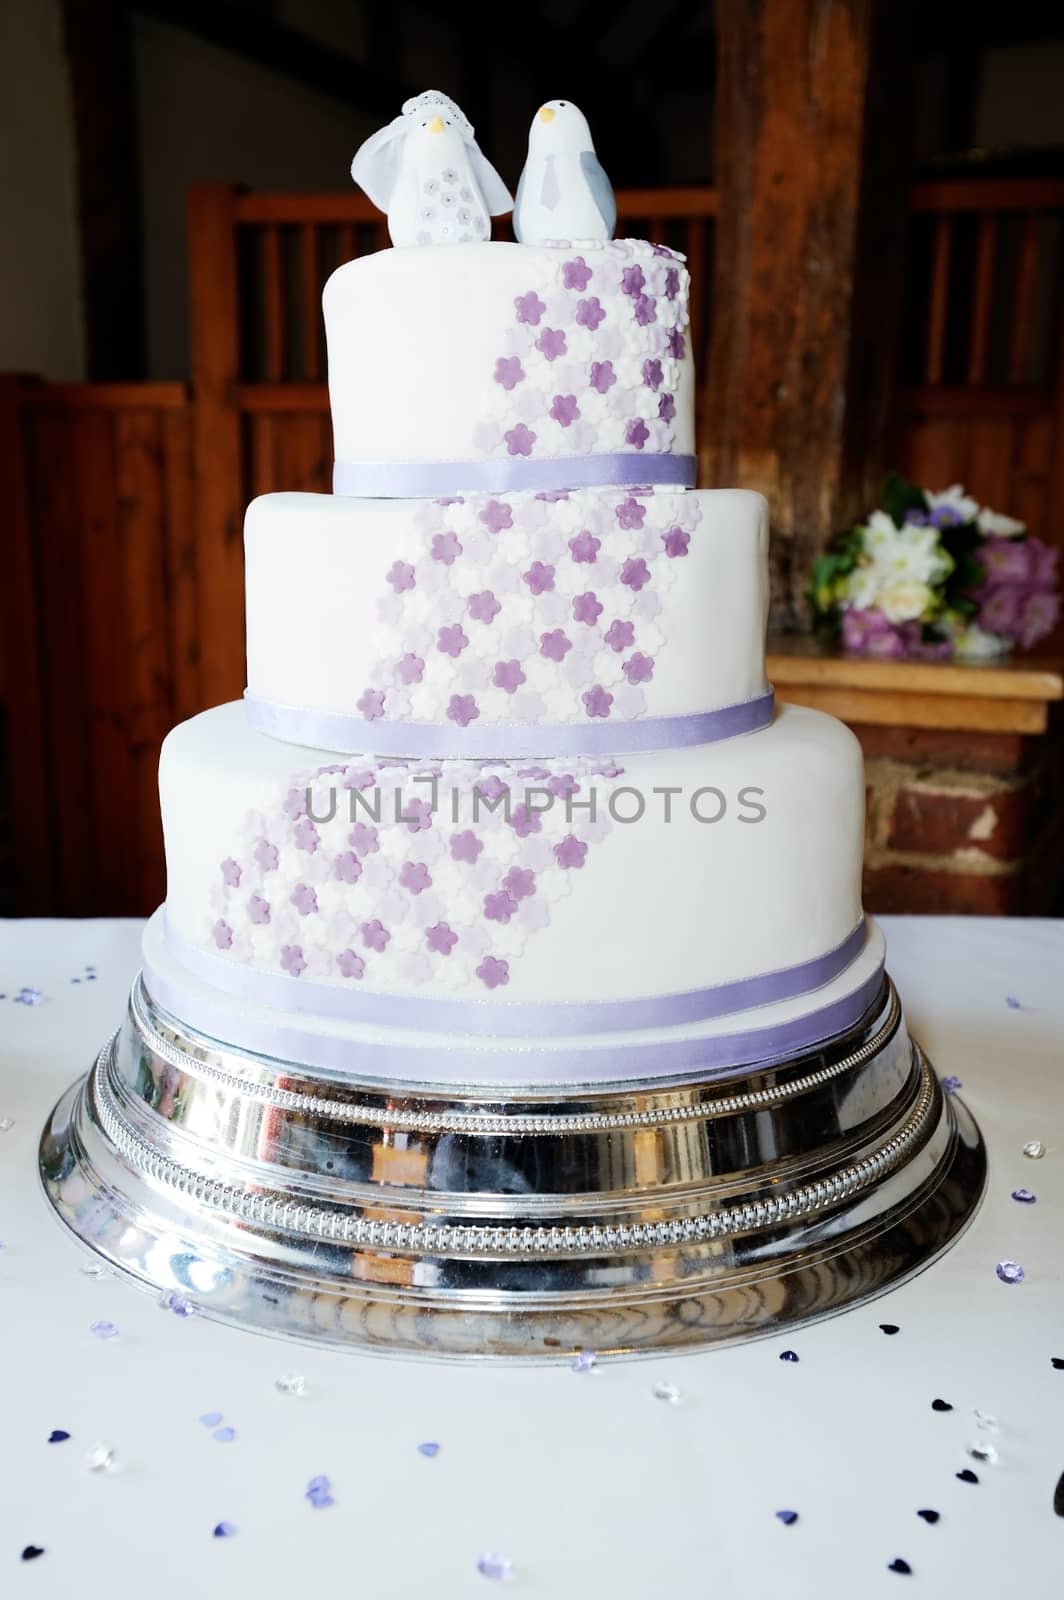 Wedding cake at reception decorated with lilac flowers